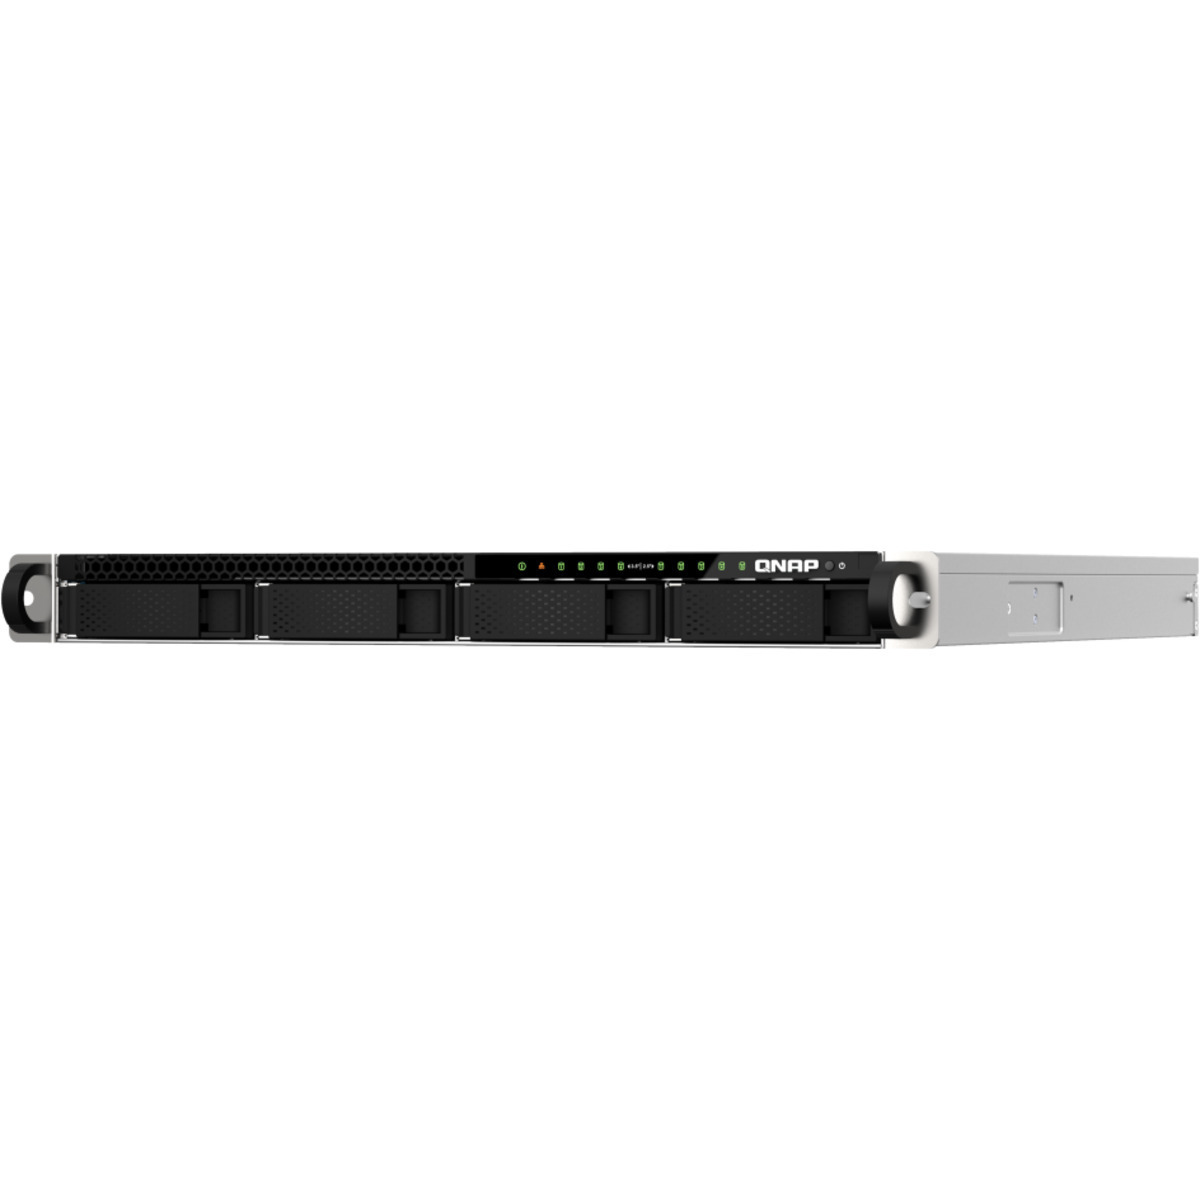 buy QNAP TS-h987XU-RP QuTS hero Edition 16tb RackMount NAS - Network Attached Storage Device 4x4000gb Toshiba MN Series MN08ADA400E 3.5 7200rpm SATA 6Gb/s HDD NAS Class Drives Installed - Burn-In Tested - ON SALE - nas headquarters buy network attached storage server device das new raid-5 free shipping simply usa christmas holiday black friday cyber monday week sale happening now! TS-h987XU-RP QuTS hero Edition